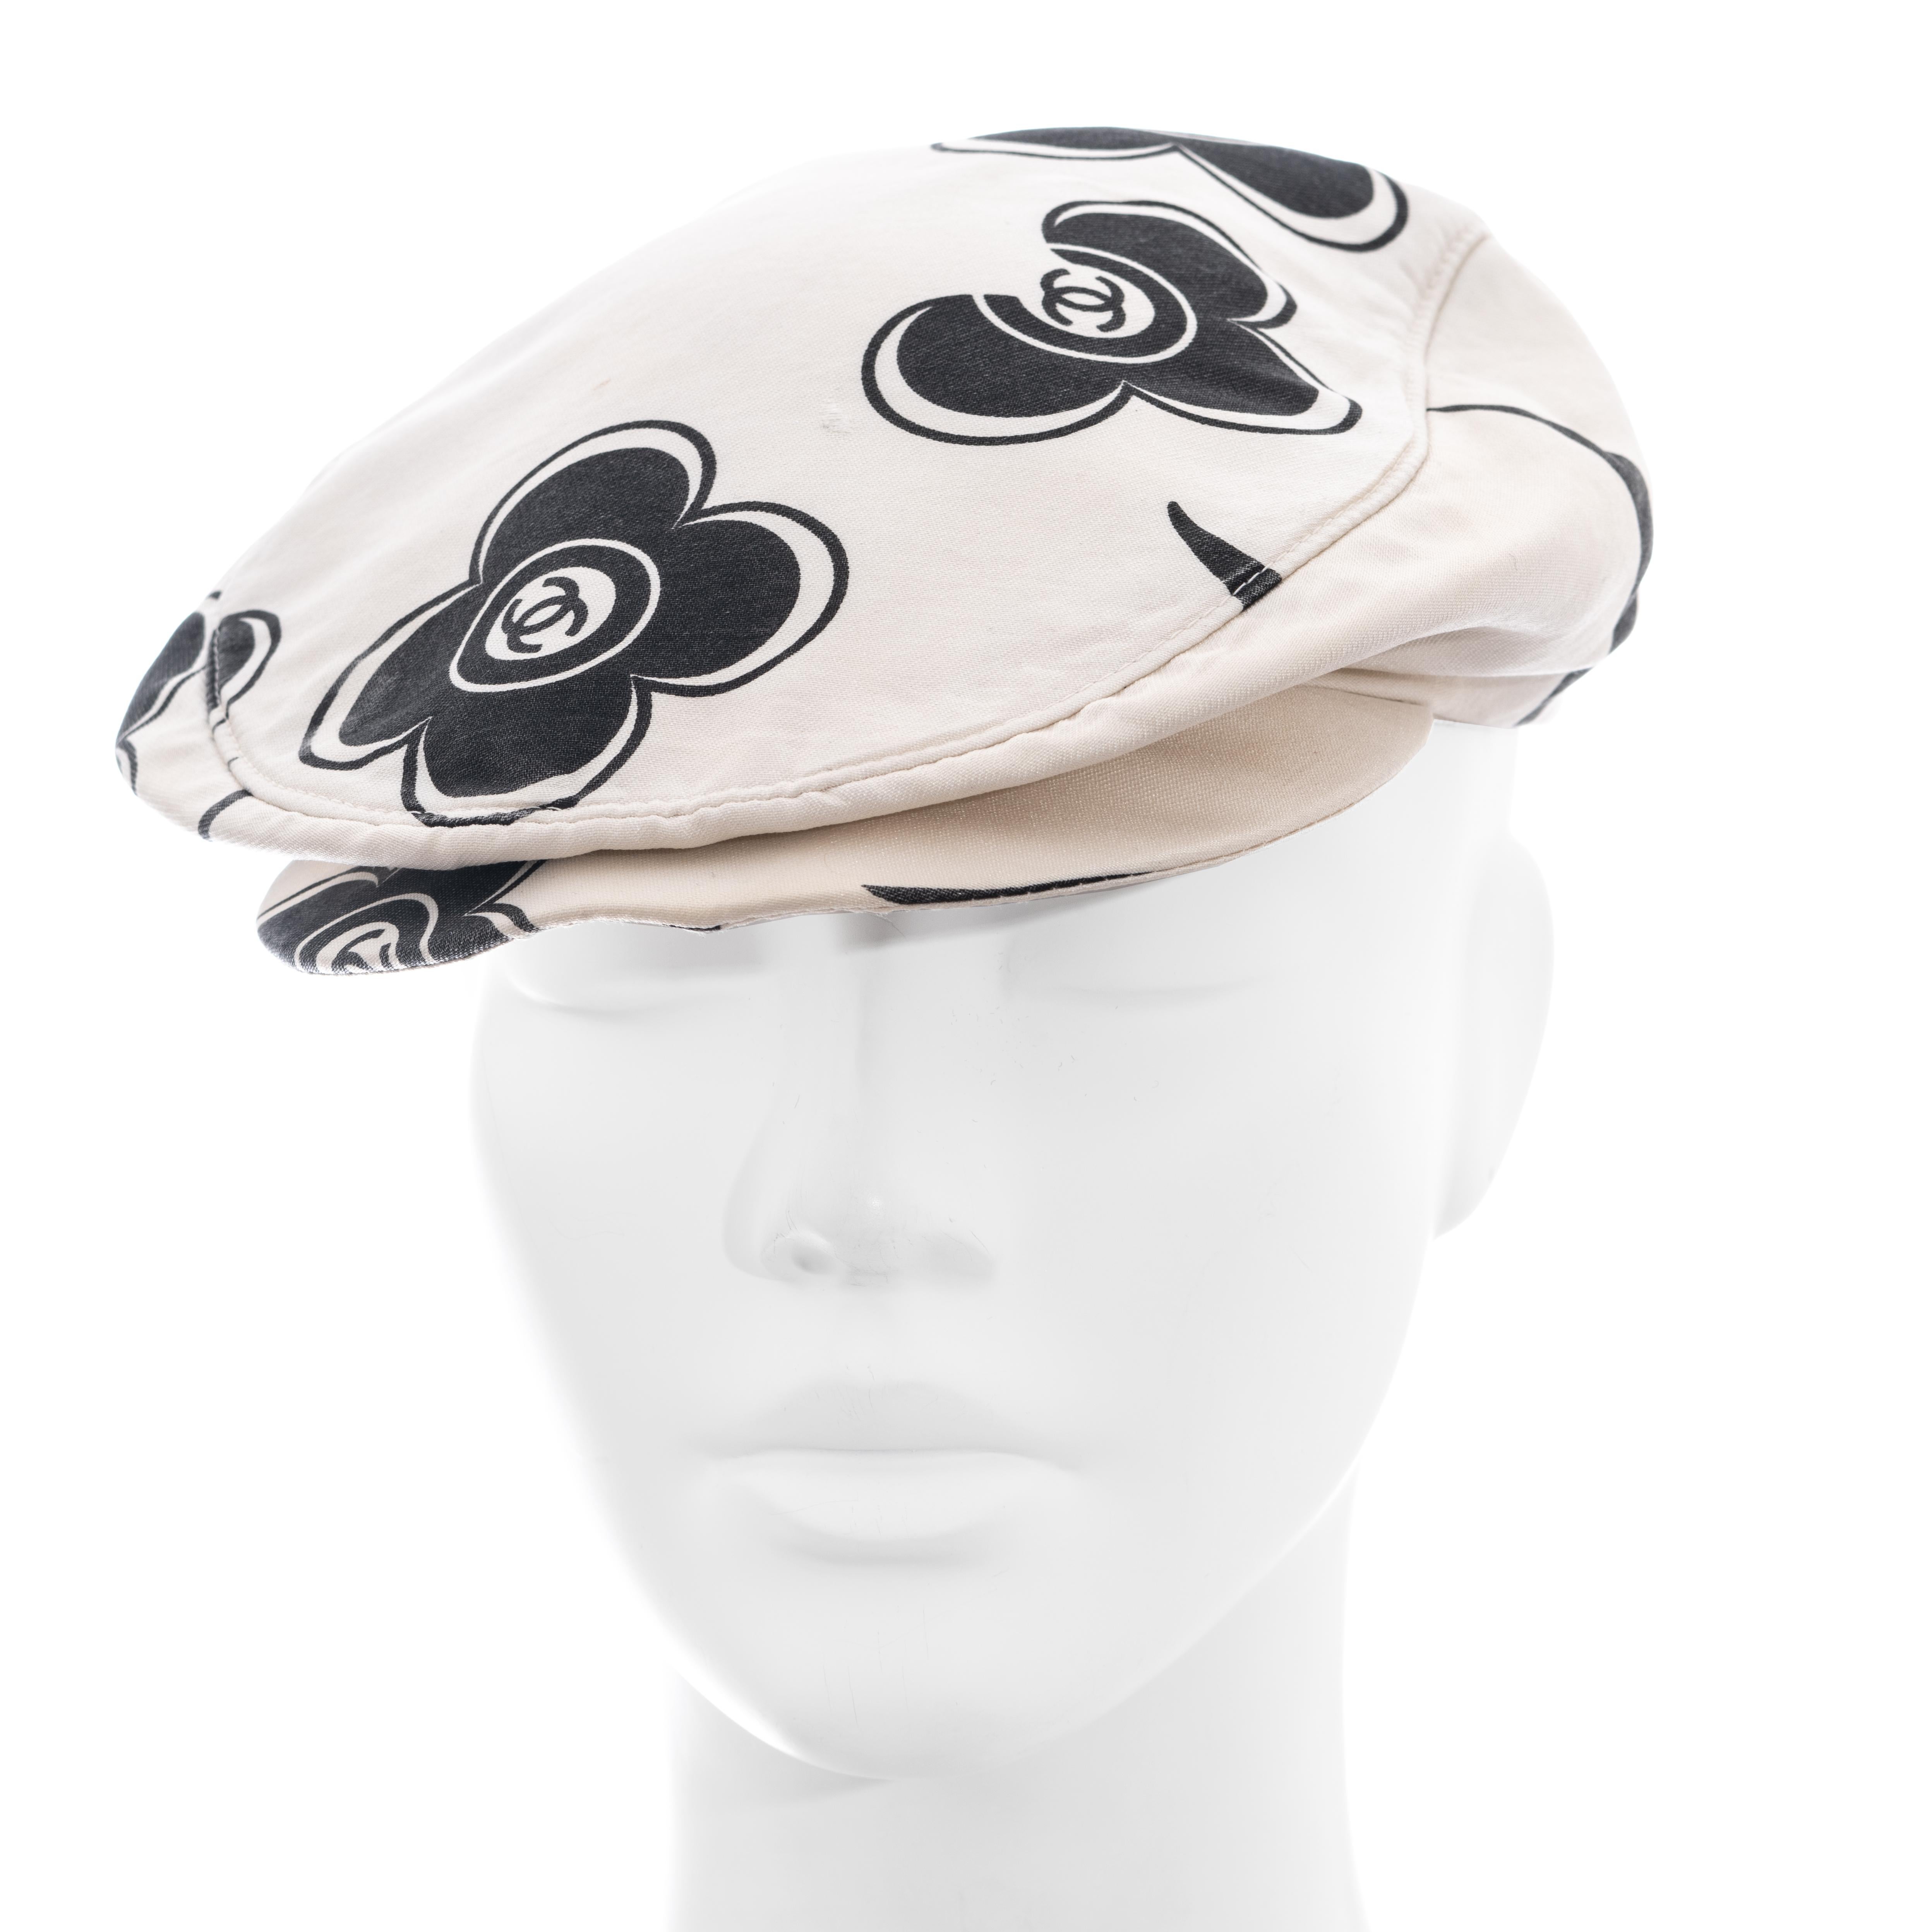 ▪ Chanel white and black flat cap
▪ Designed by Karl Lagerfeld 
▪ 100% Silk 
▪ Floral design with 'CC' logos 
▪ Size Medium
▪ Spring-Summer 2002